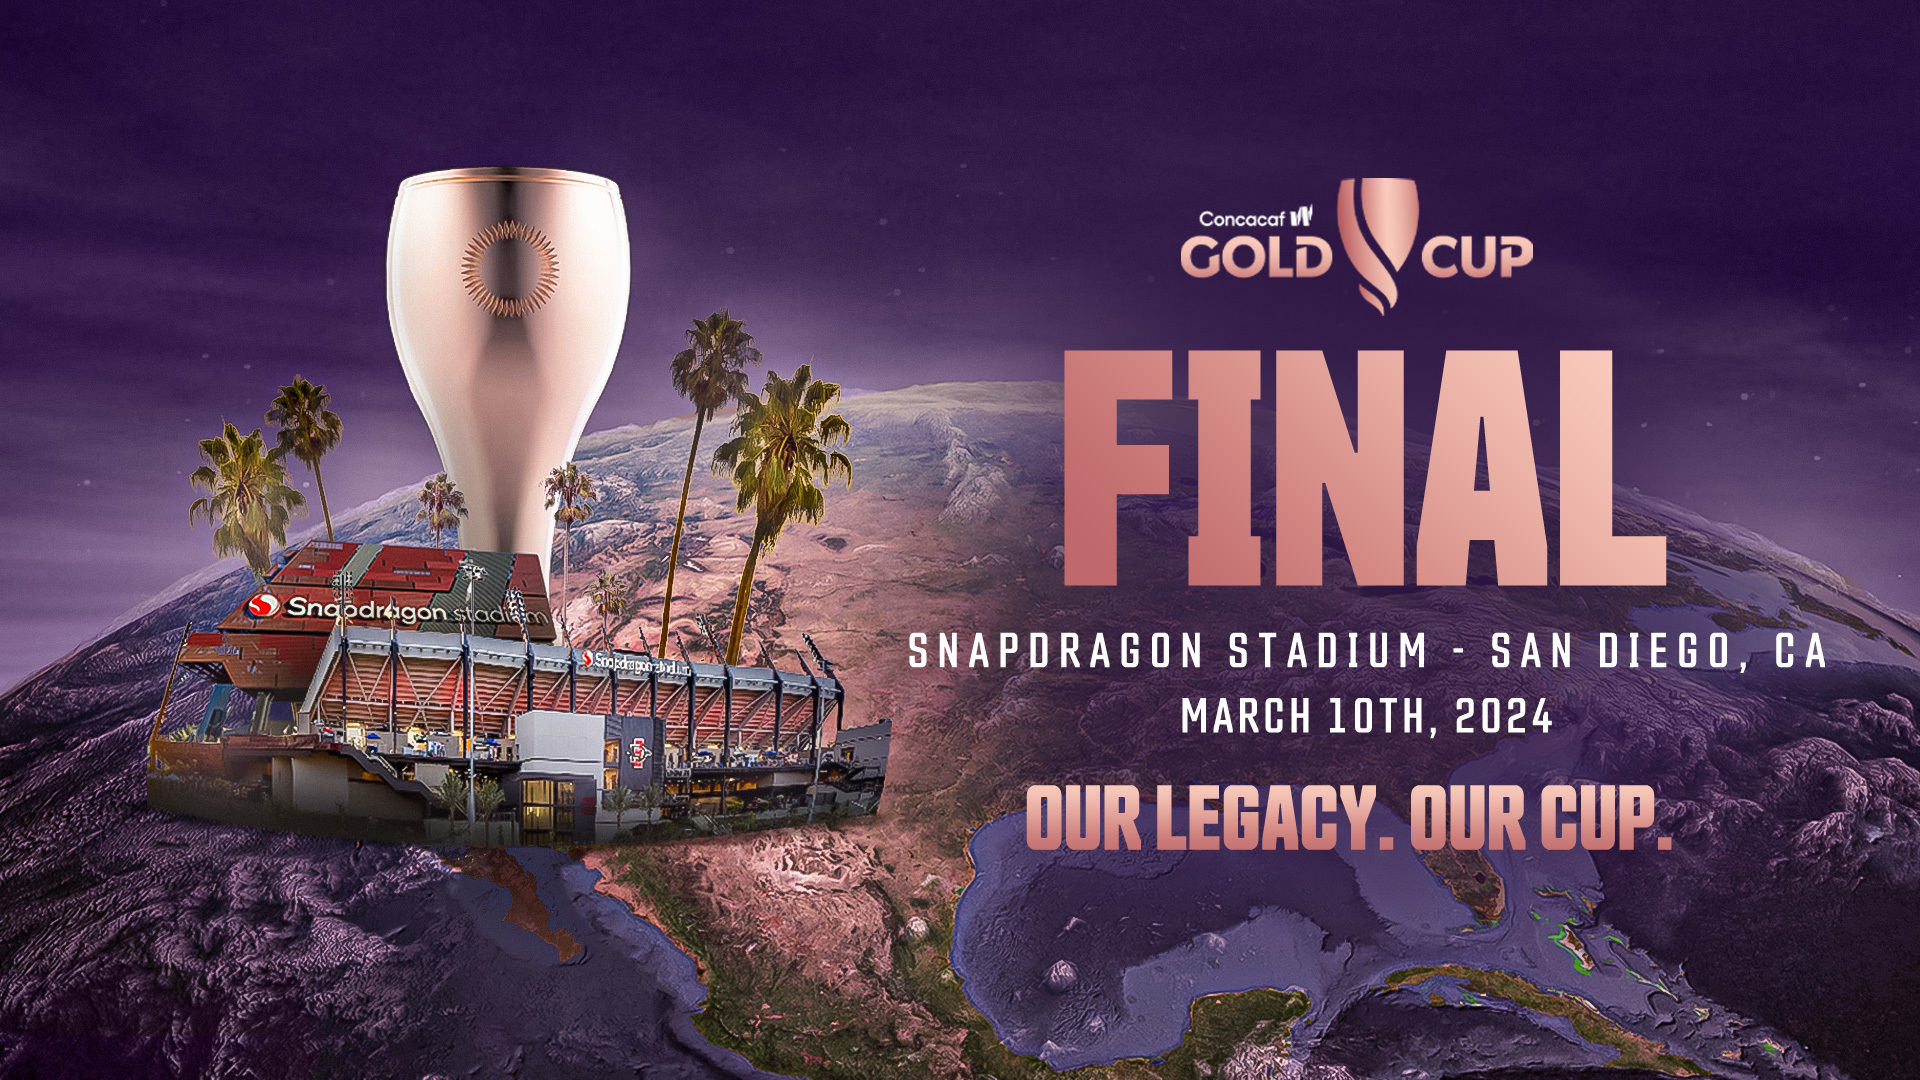 W Gold Cup Final Snapdragon Stadium 